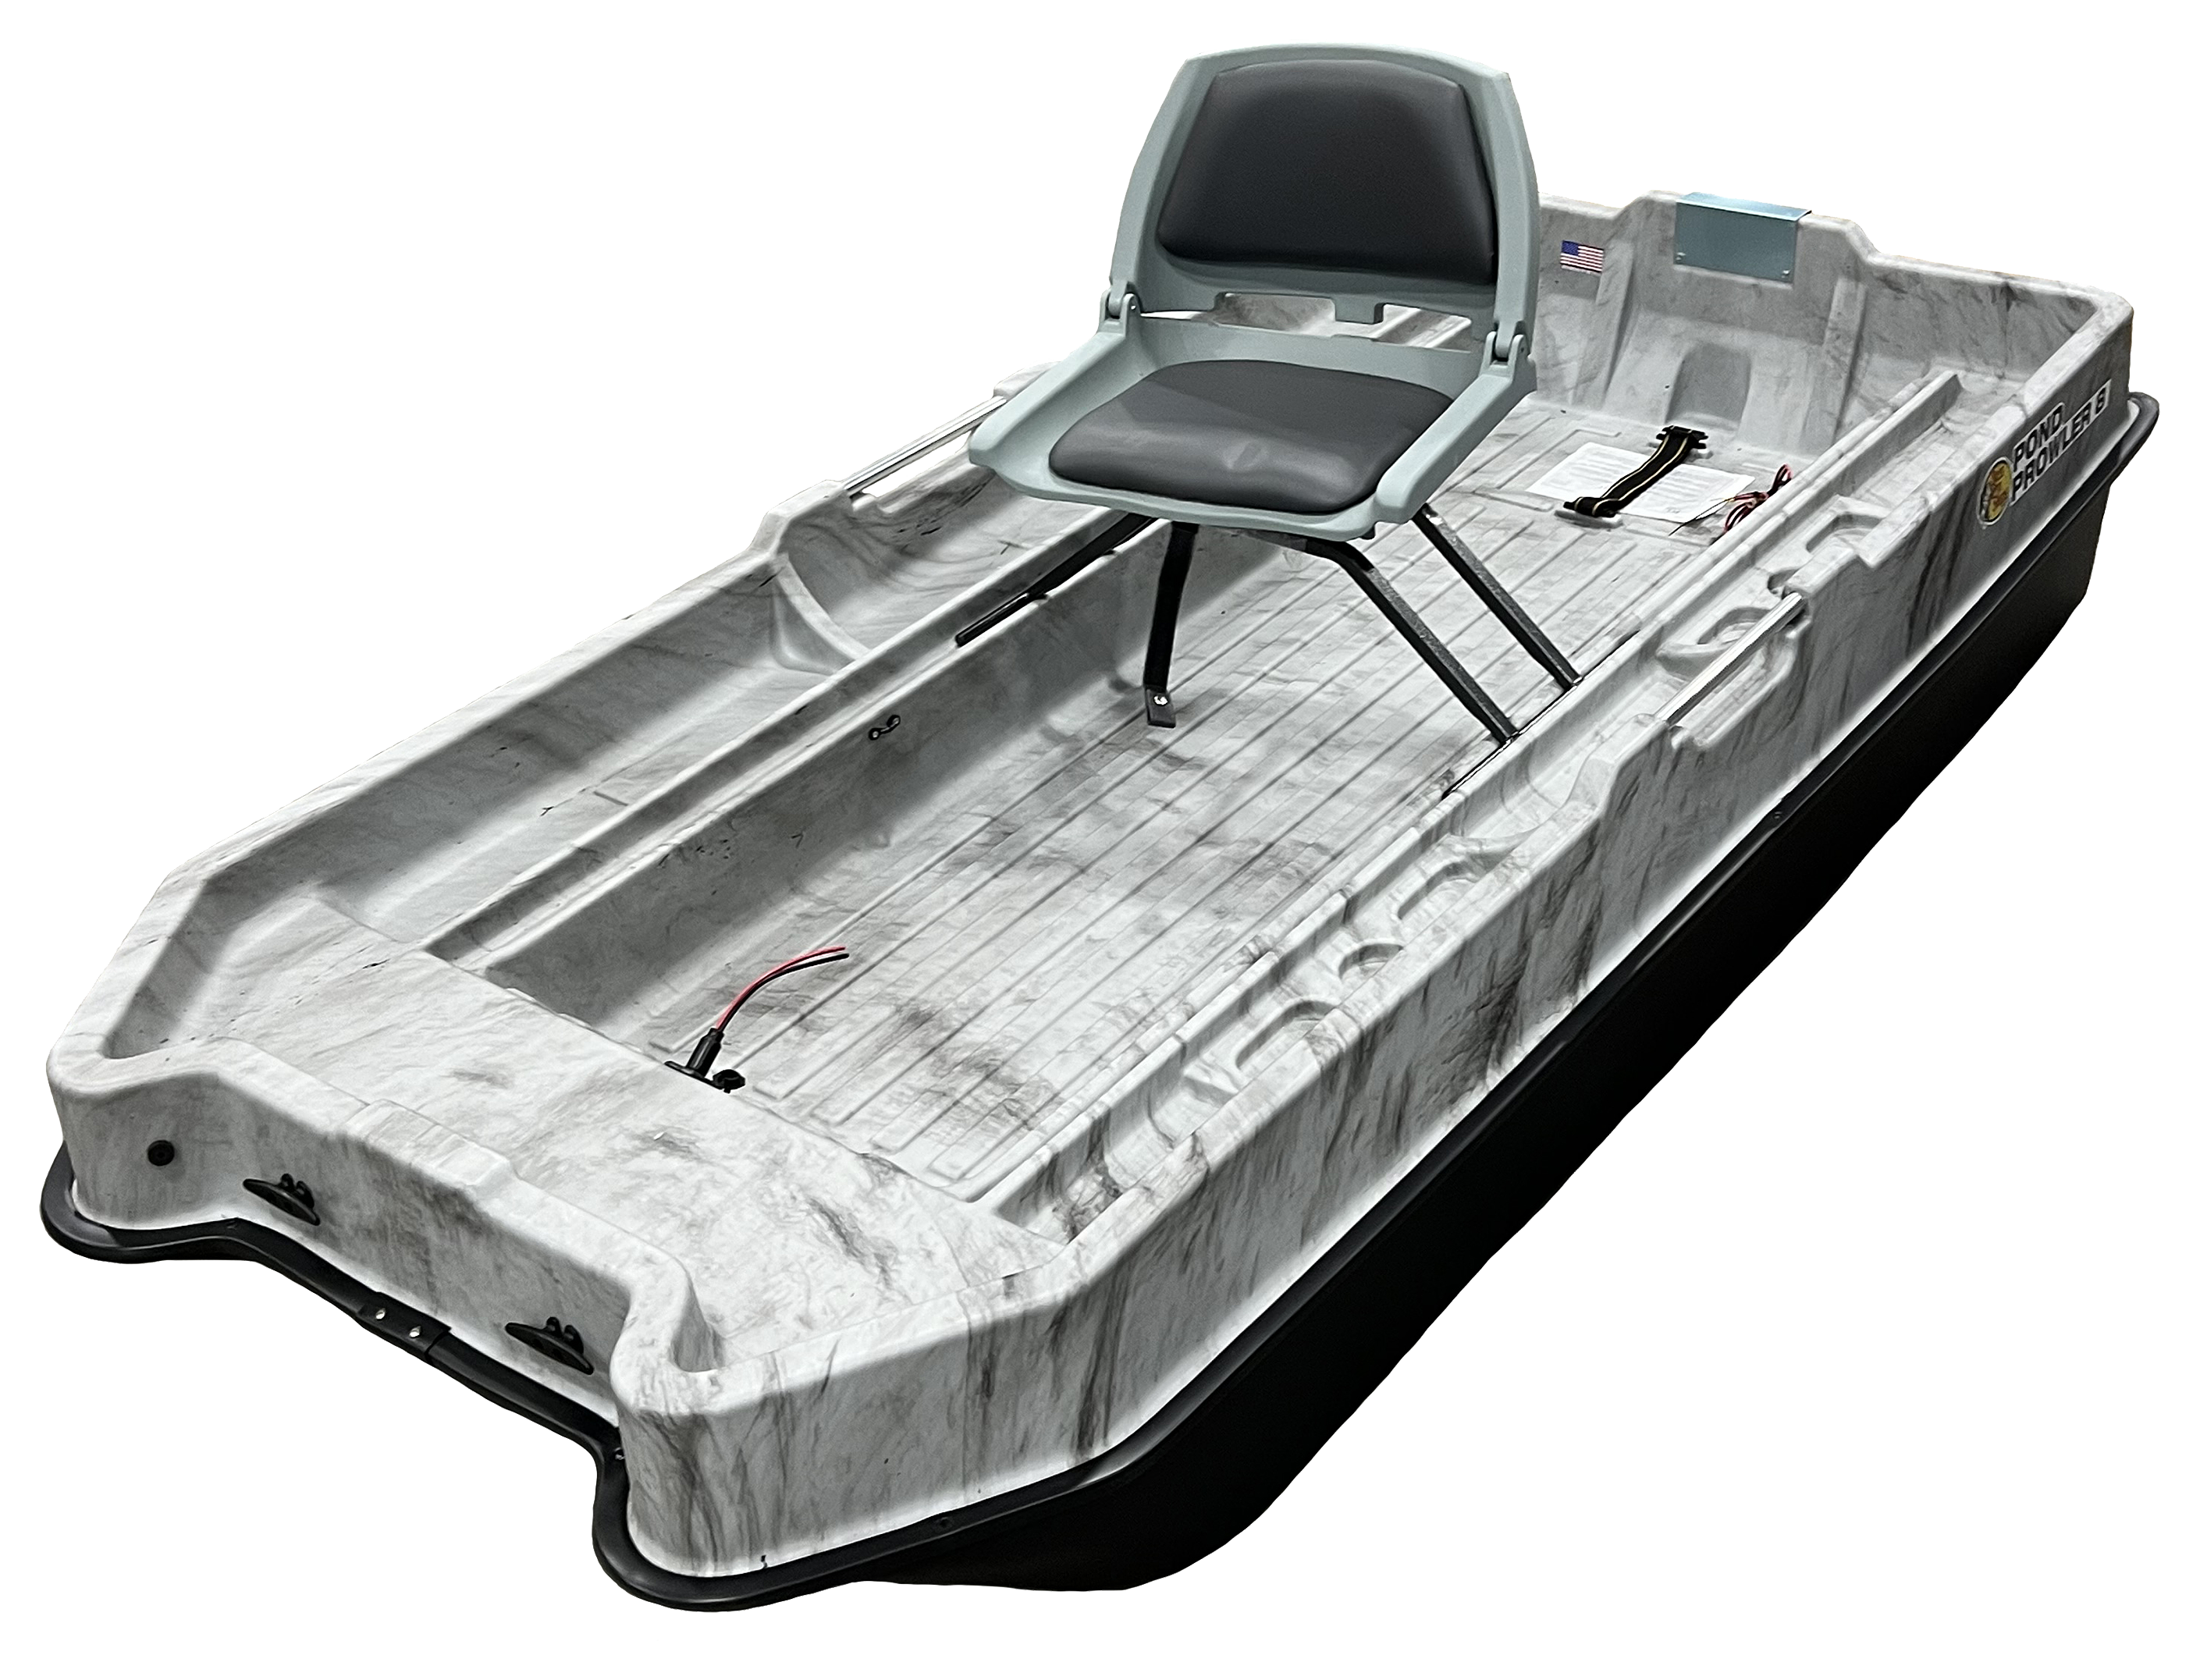 Wholesale motor boat accessories In Different Sizes And Horsepower